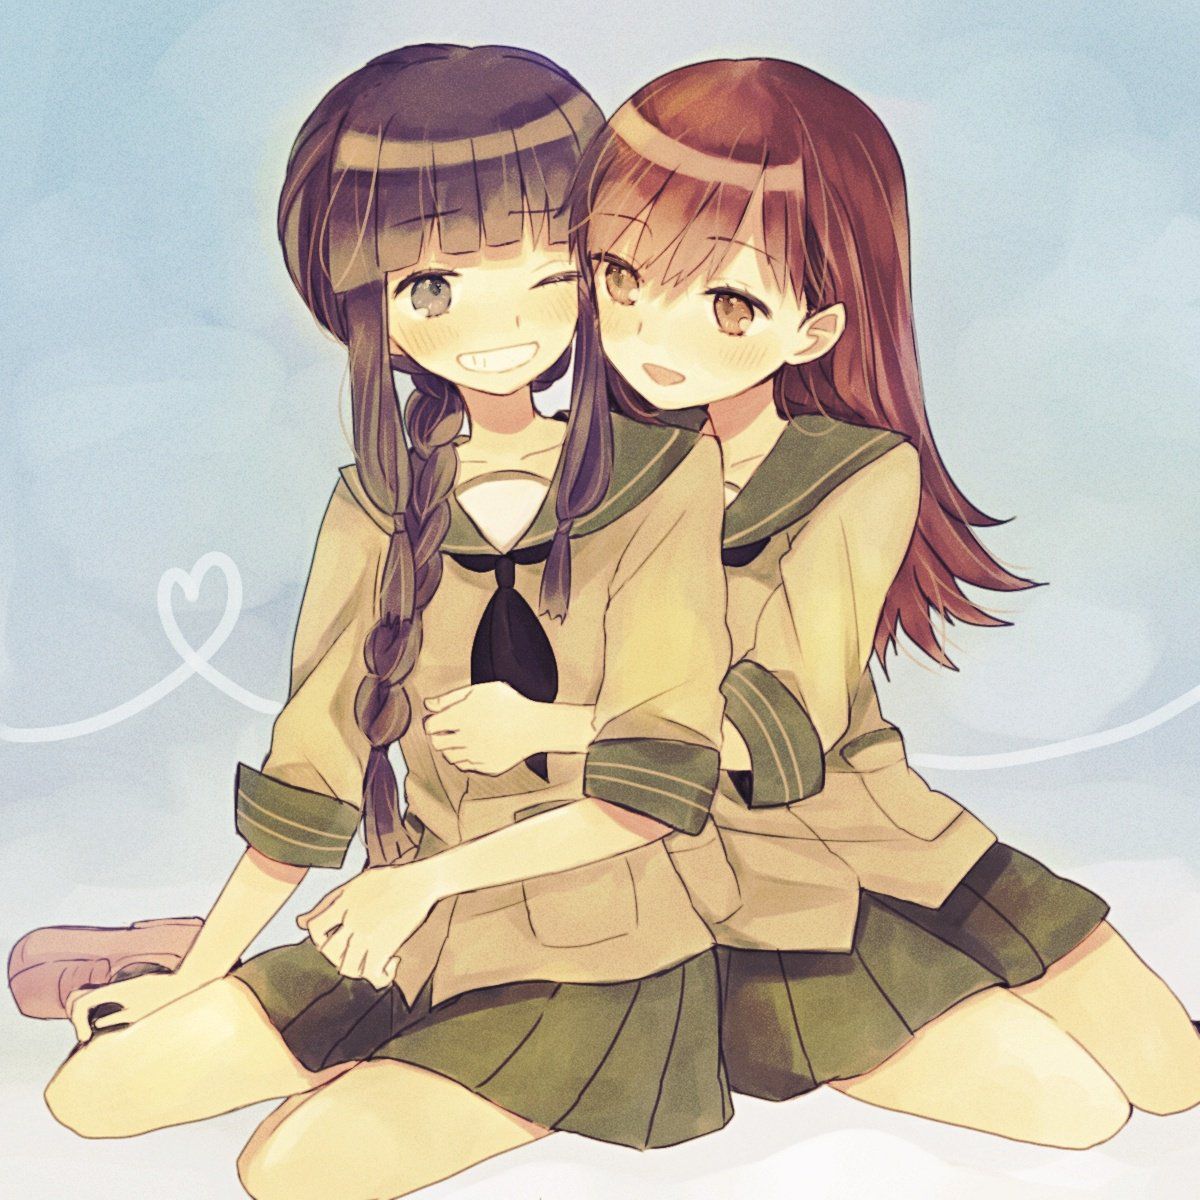 [Secondary] [Ship it] kitakami and ōi was our cute image she wants! 17